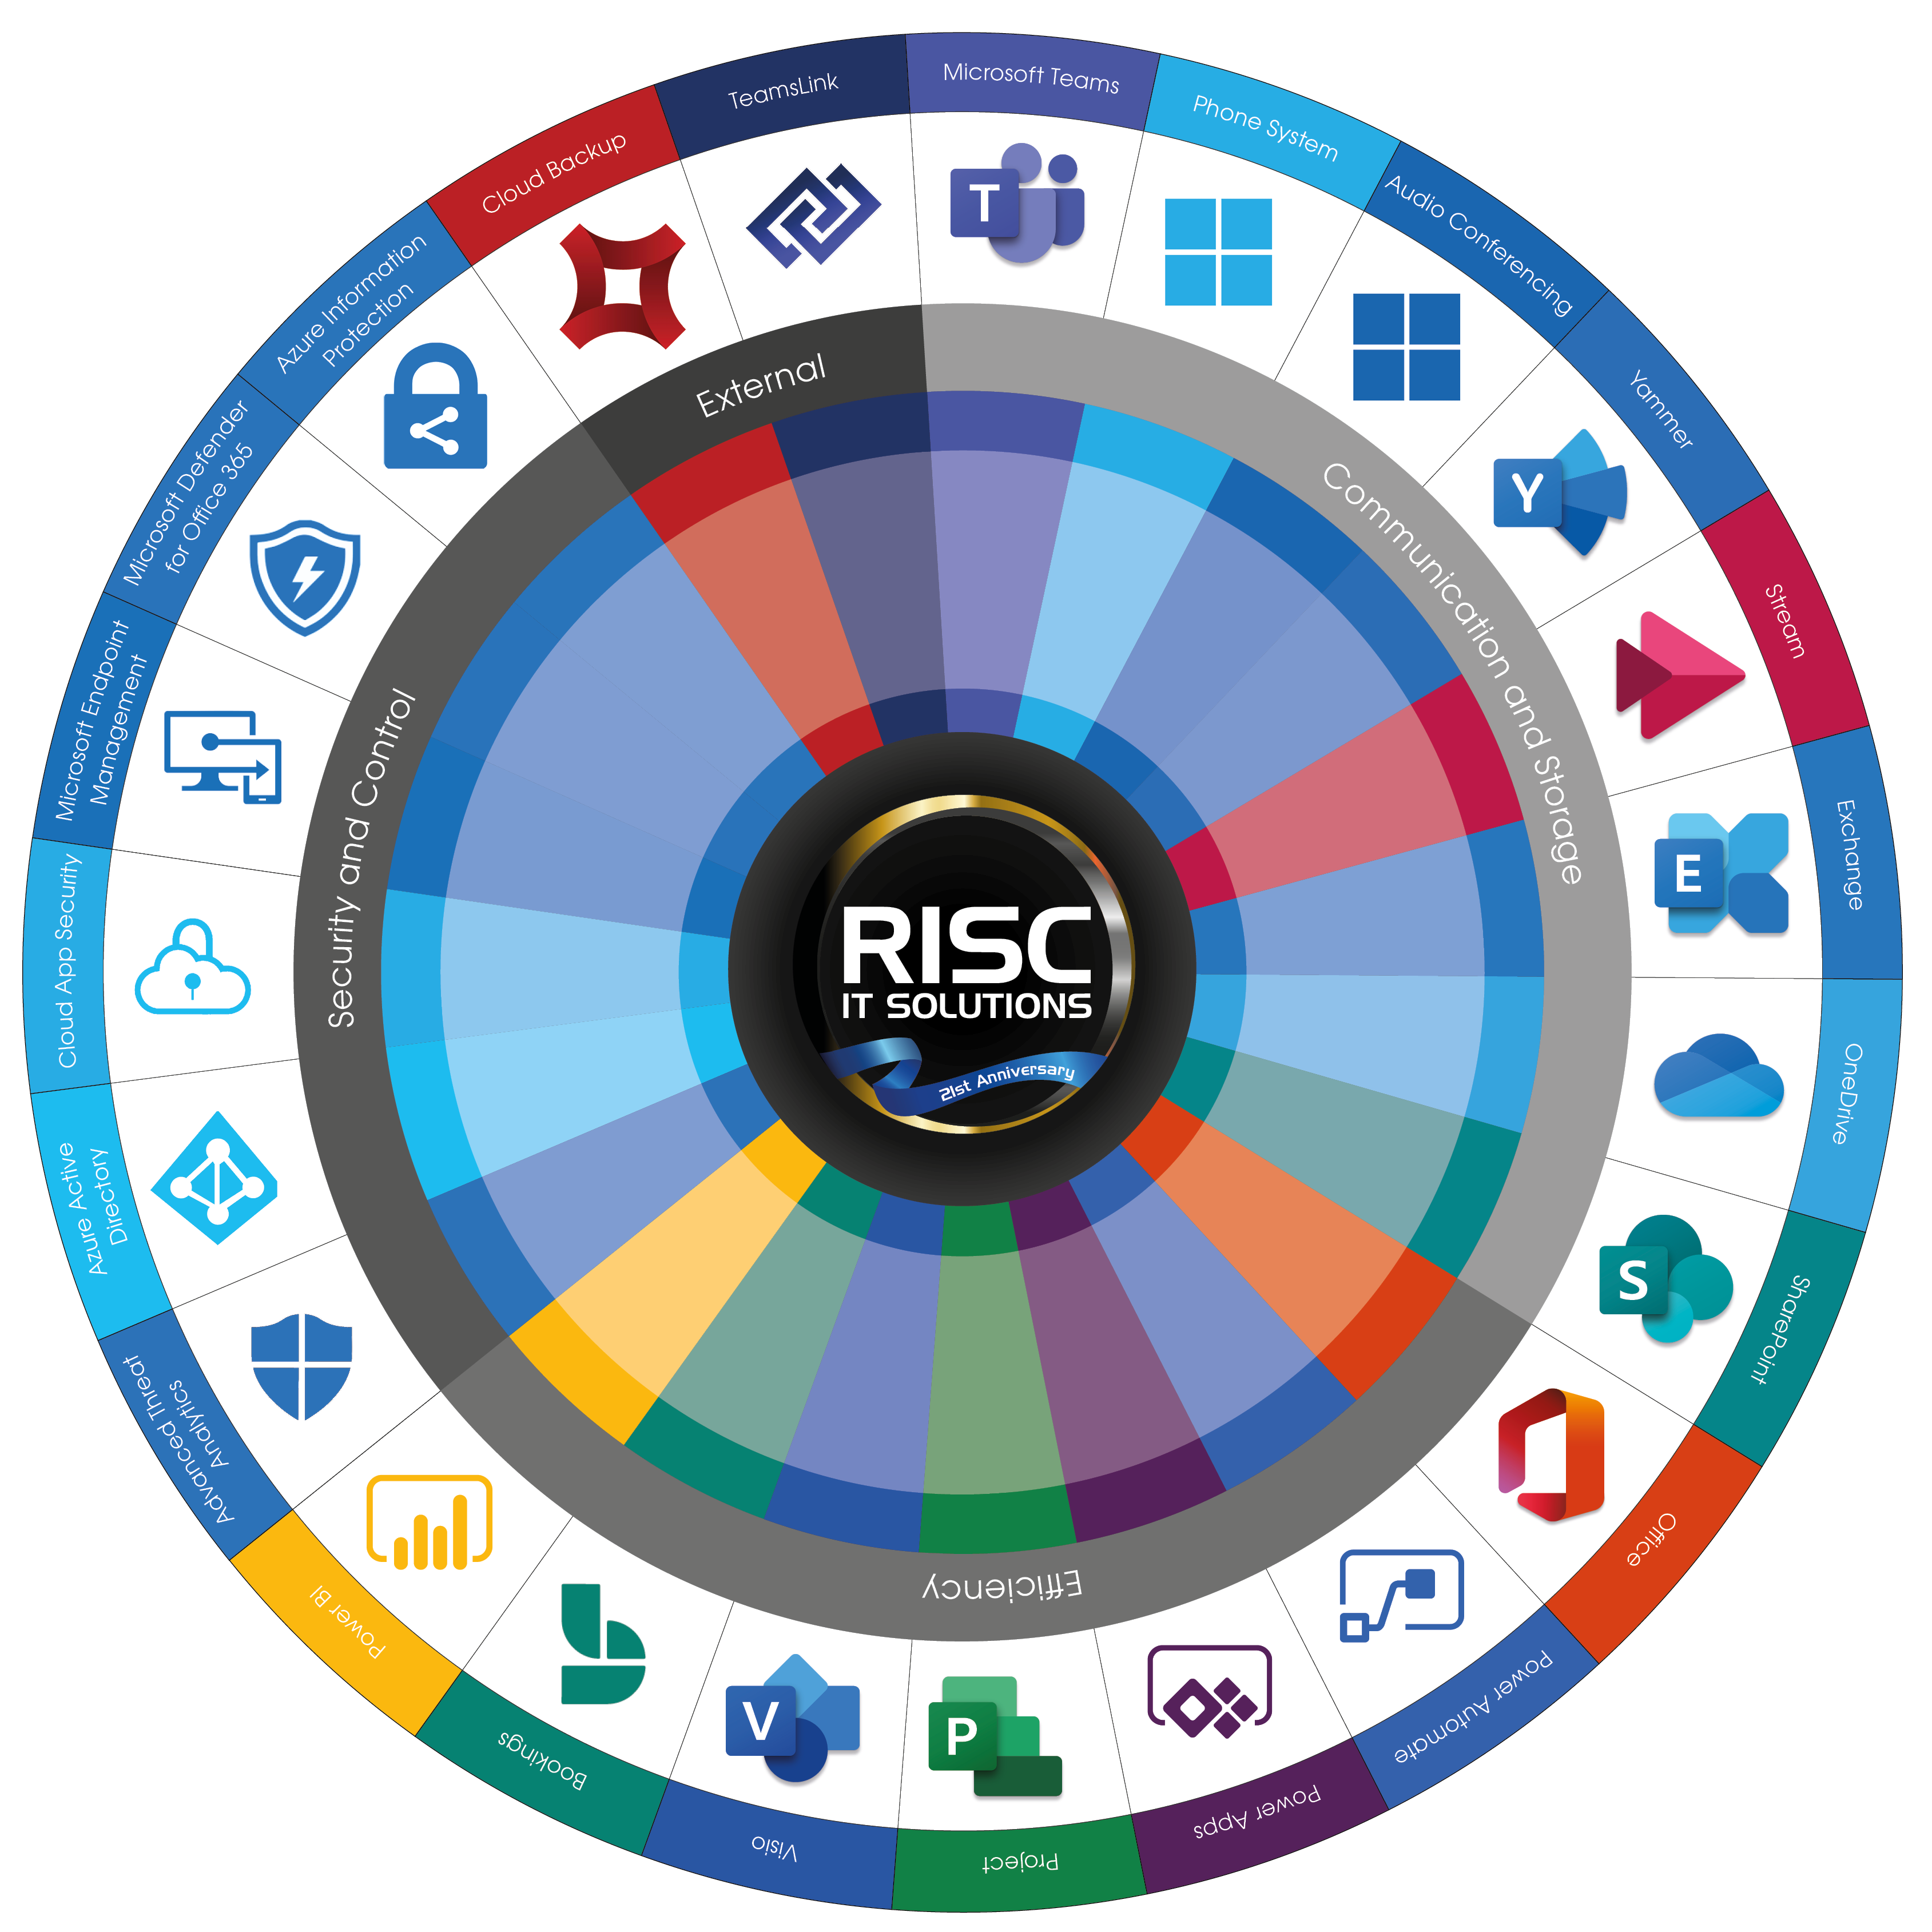 Risc IT Solutions - Microsoft 365